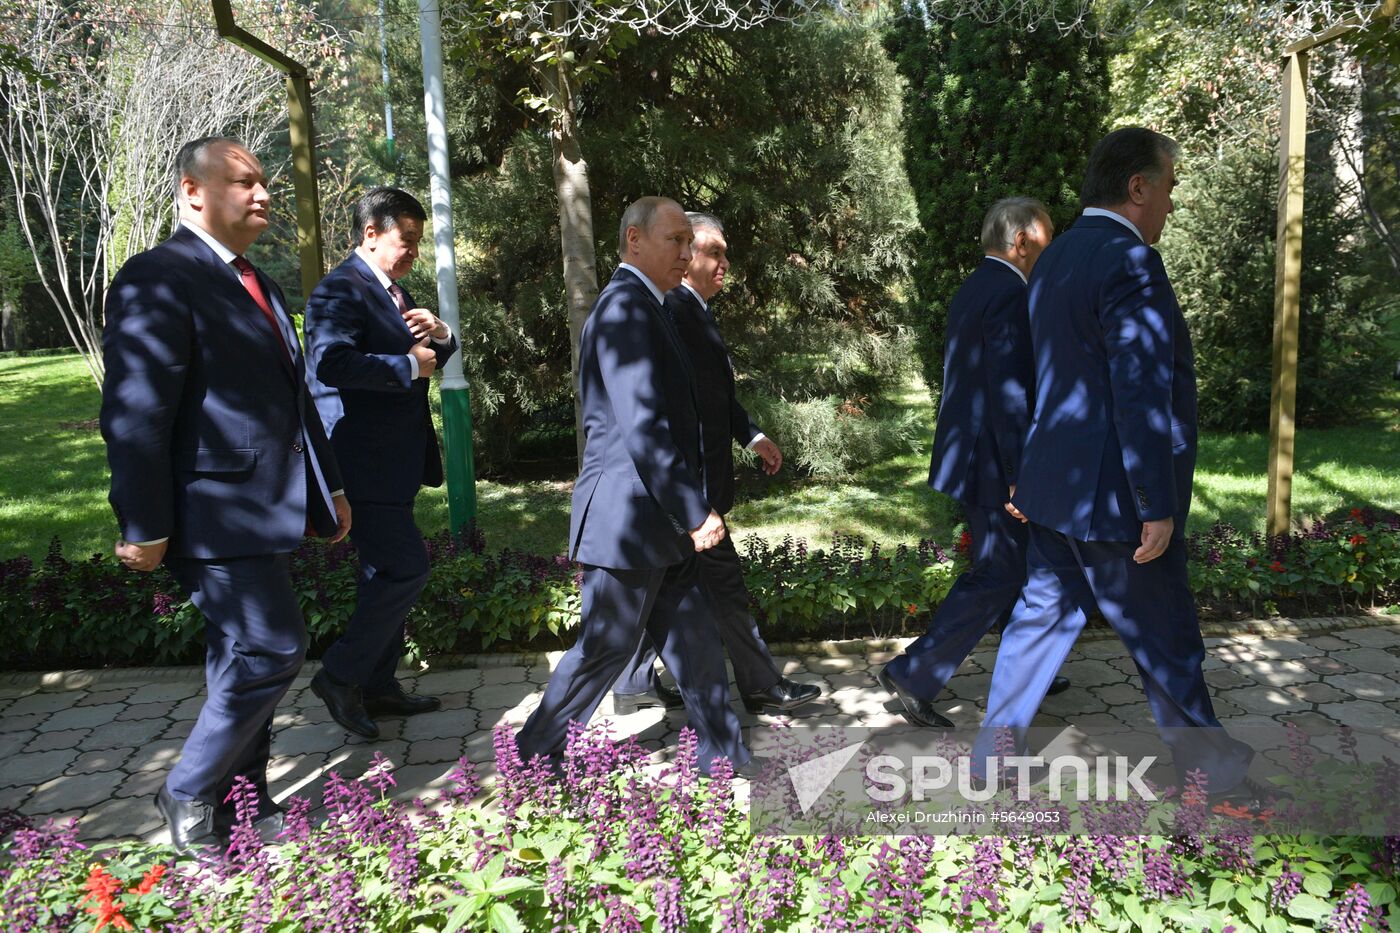 President Vladimir Putin attends CIS Heads of State Council meeting in Dushanbe